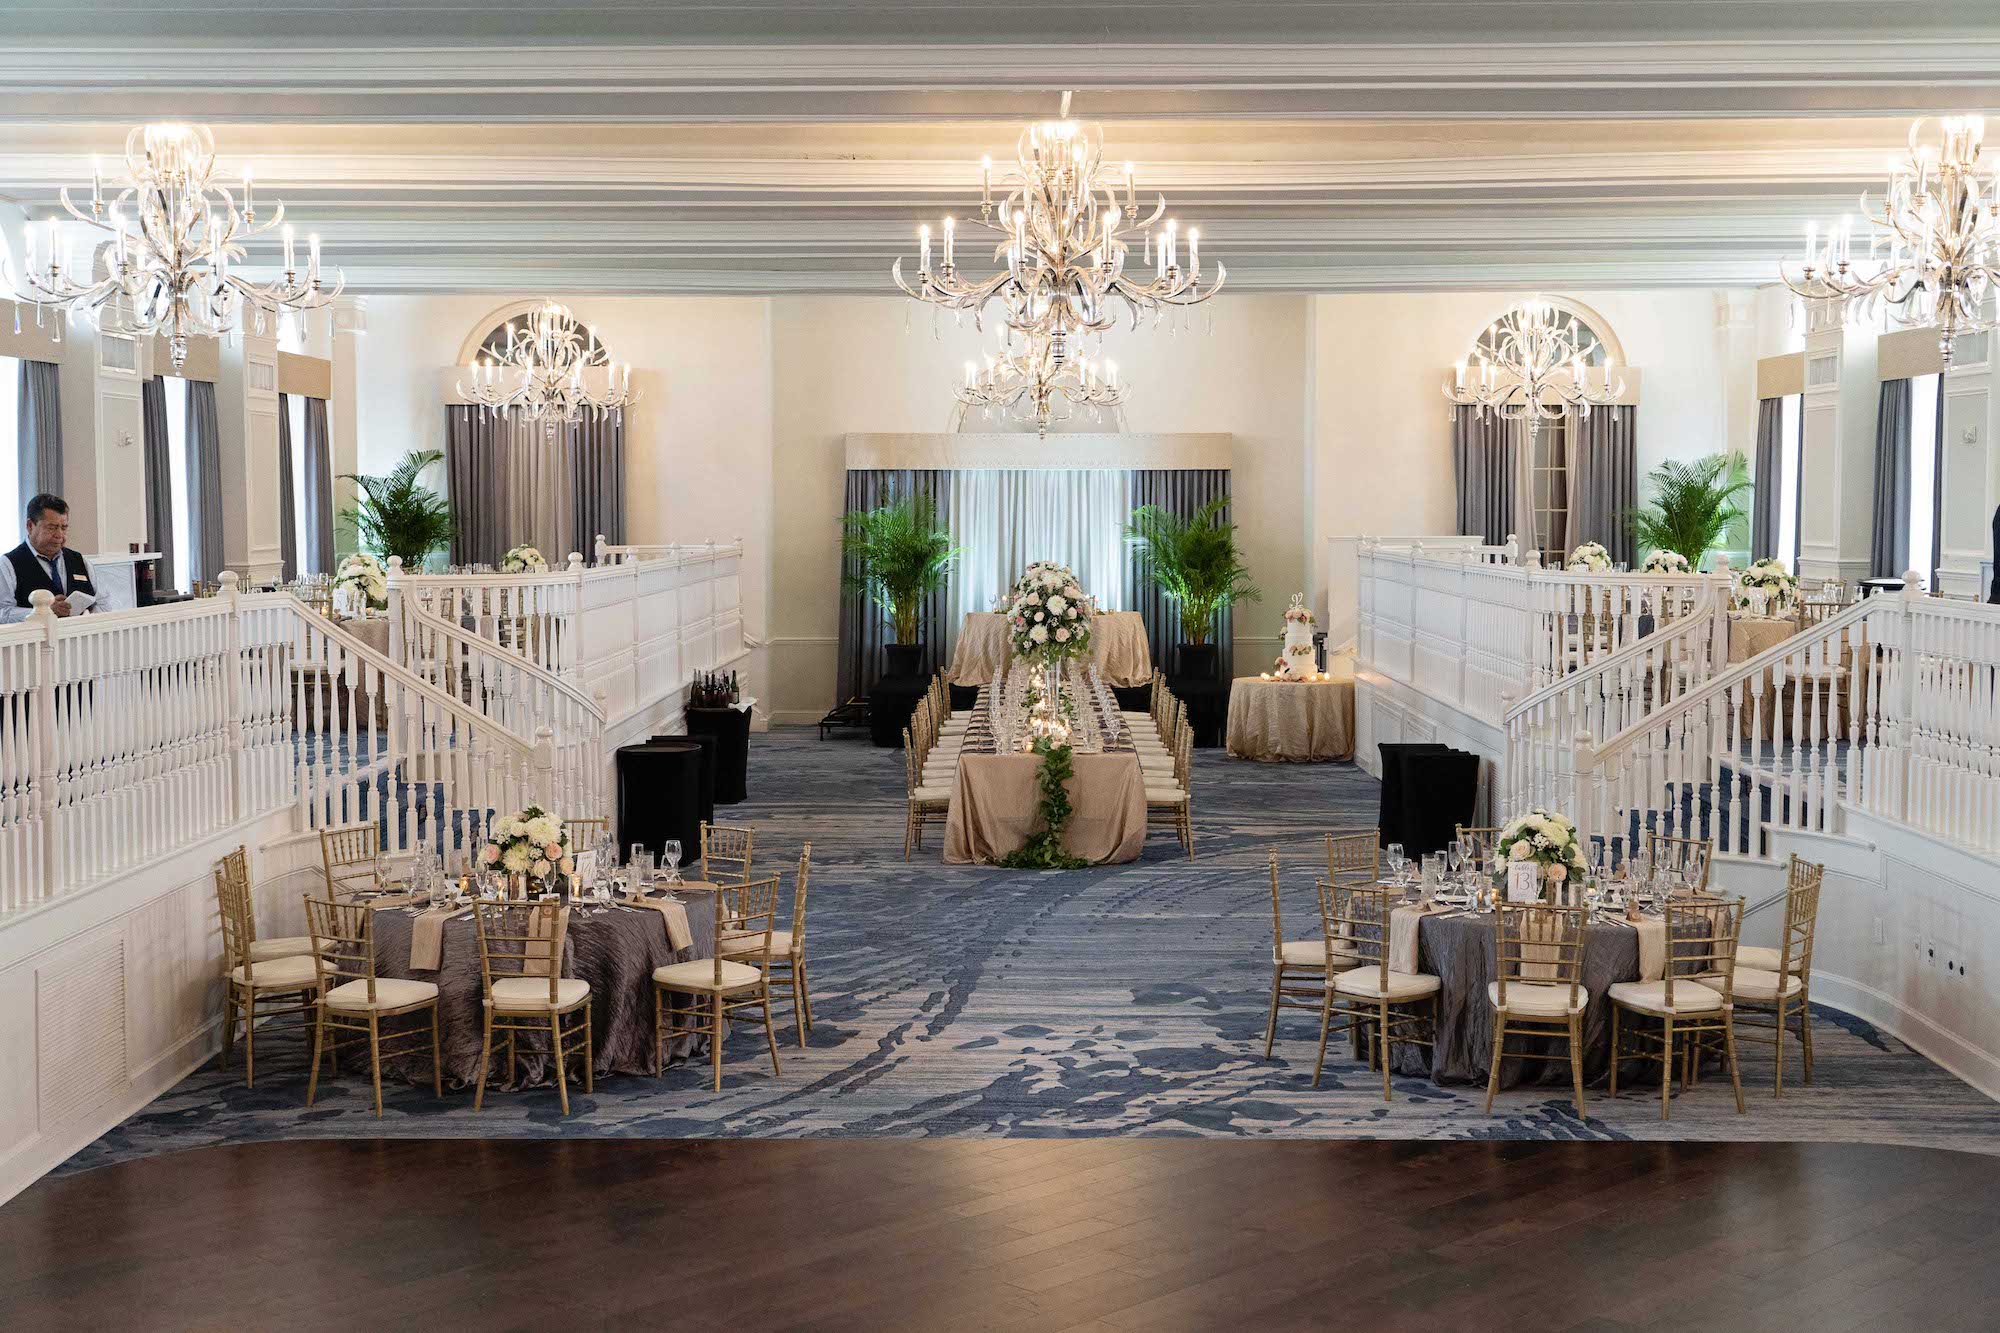 Elegant Summer Wedding in Two Tier Grand Ballroom, Gold Chiavari Chairs with Wedding Party Head Table, Round Tables with Silver and Gold Linens, Palm Leaf Decor, Low Floral Centerpieces with White and Blush Pink Flowers | Tampa Bay Historic Wedding Venue The Don CeSar on St. Pete Beach